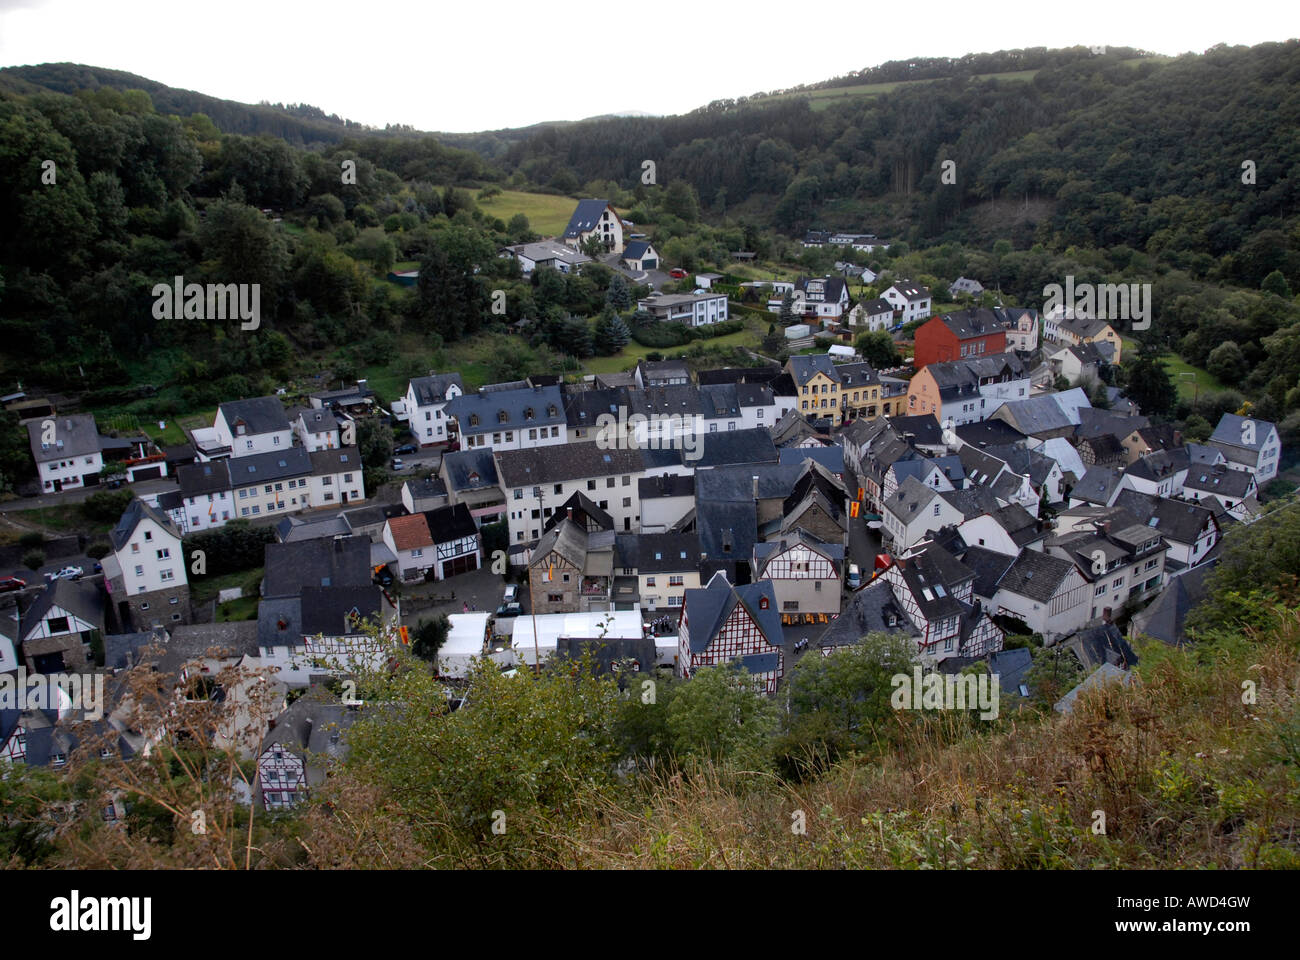 Town of Monreal, winner of the 'Unser Dorf hat Zukunft' (Our Town Has a Future) national contest in 2004, Monreal, Rhineland-Pa Stock Photo